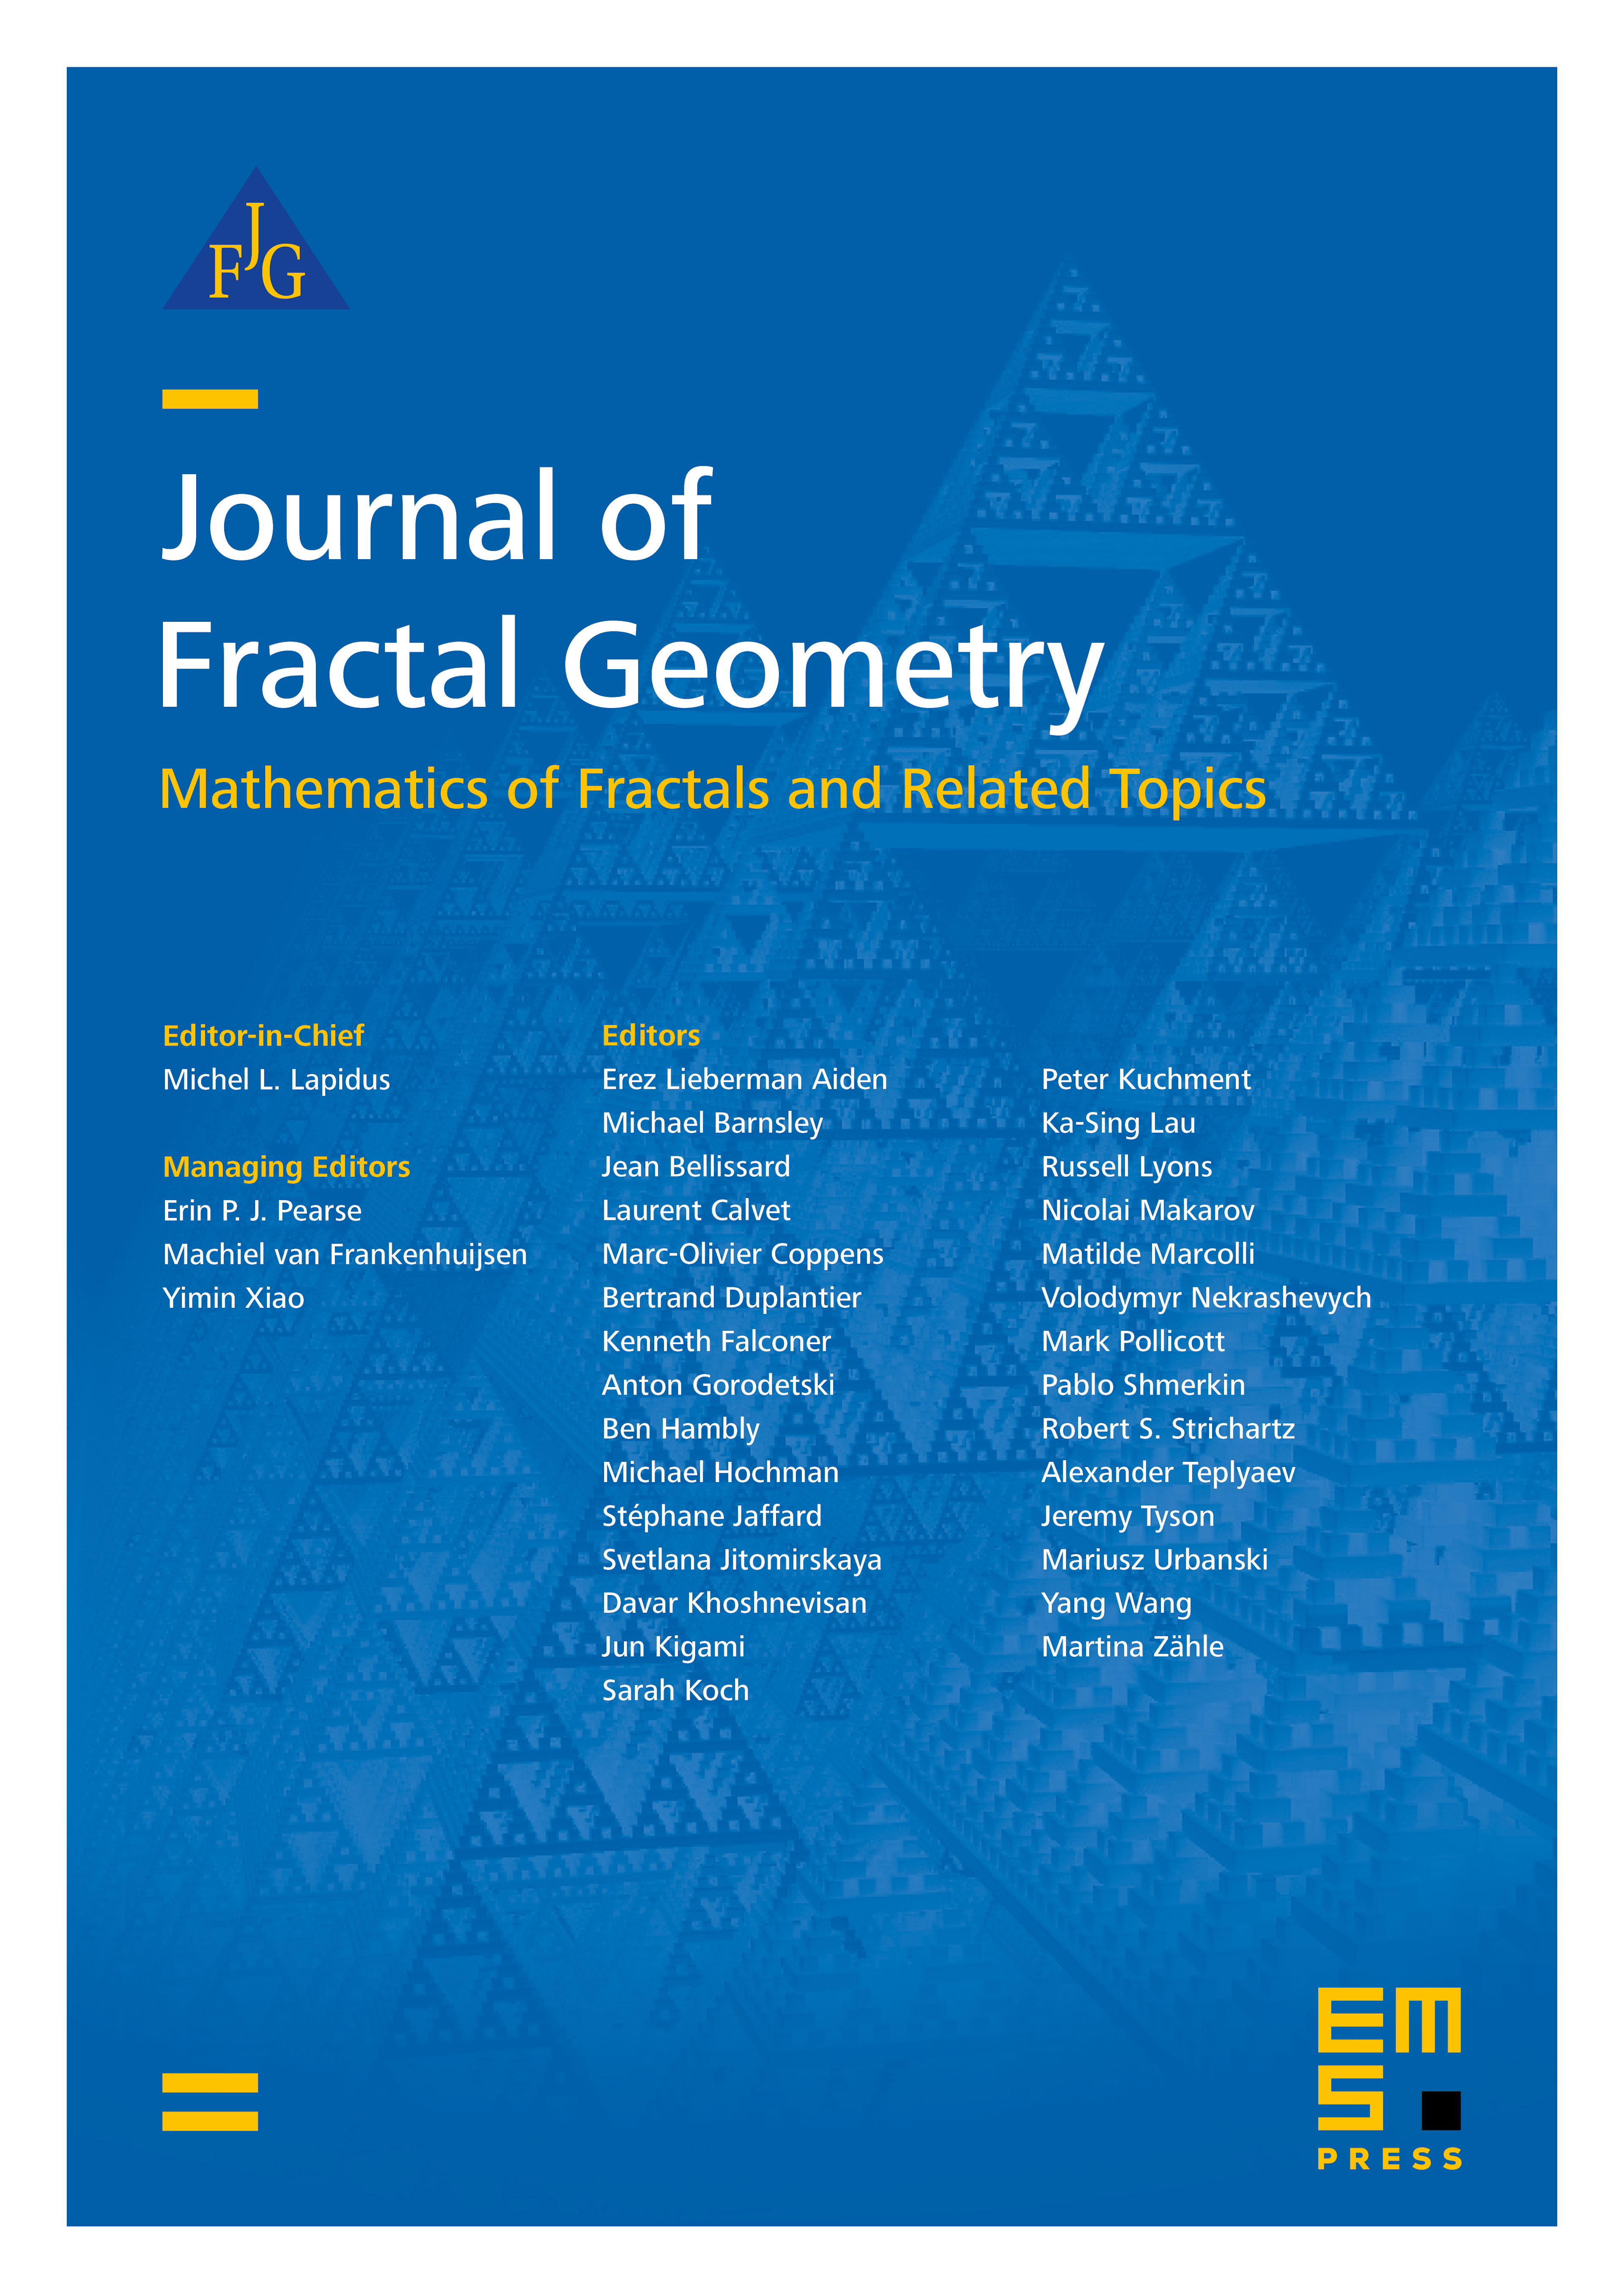 Construction and box dimension of recurrent fractal interpolation surfaces cover